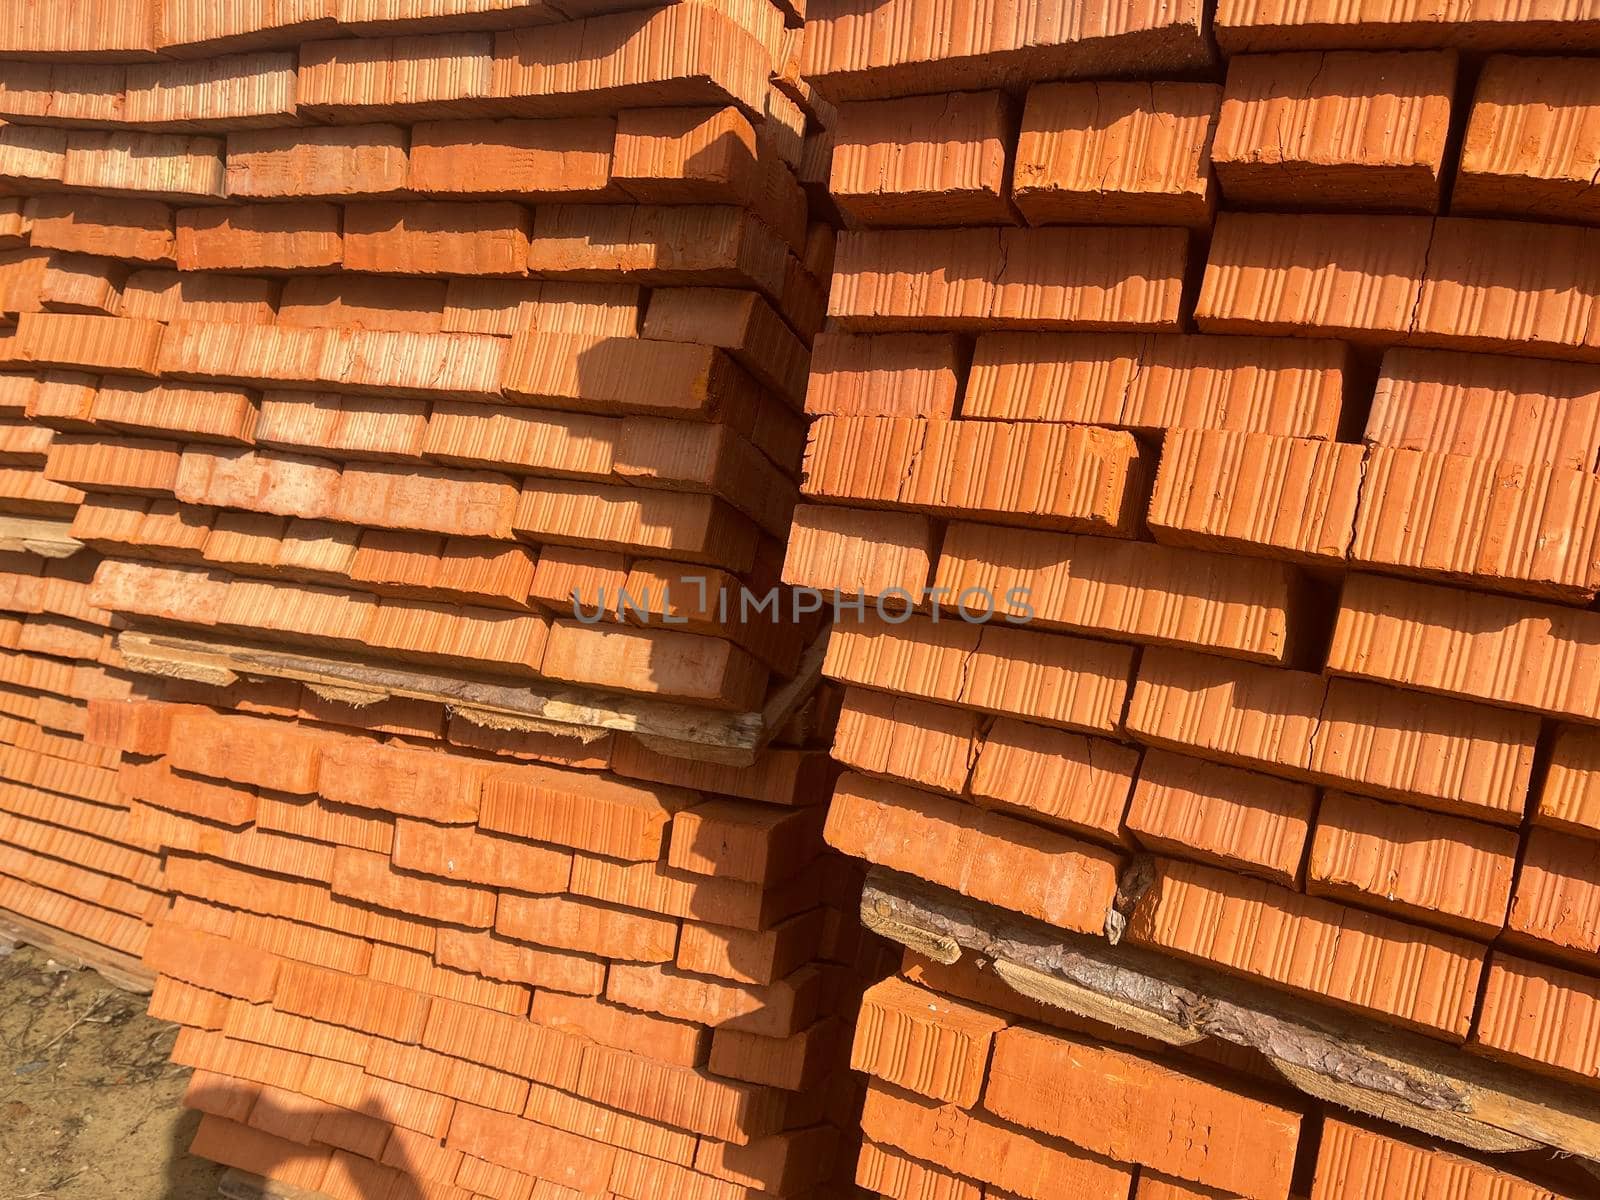 Pile of pallets with red bricks on city street. Building materials on construction site outdoor. Concept of constructing buildings